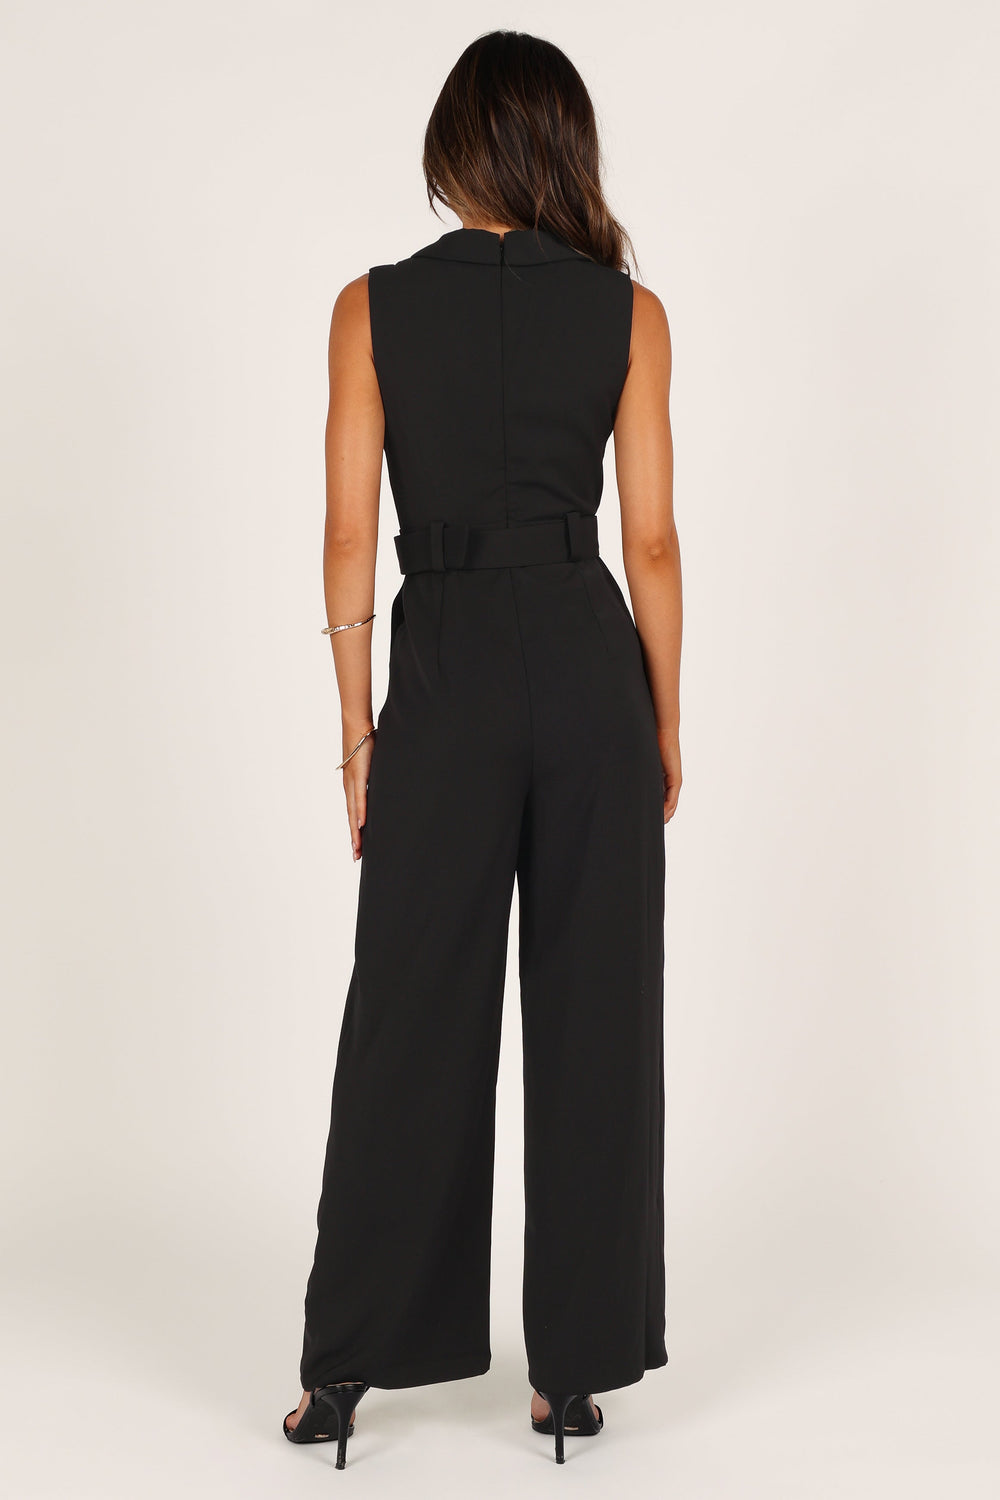 Petal and Pup USA Rompers Sienna Belted Jumpsuit - Black